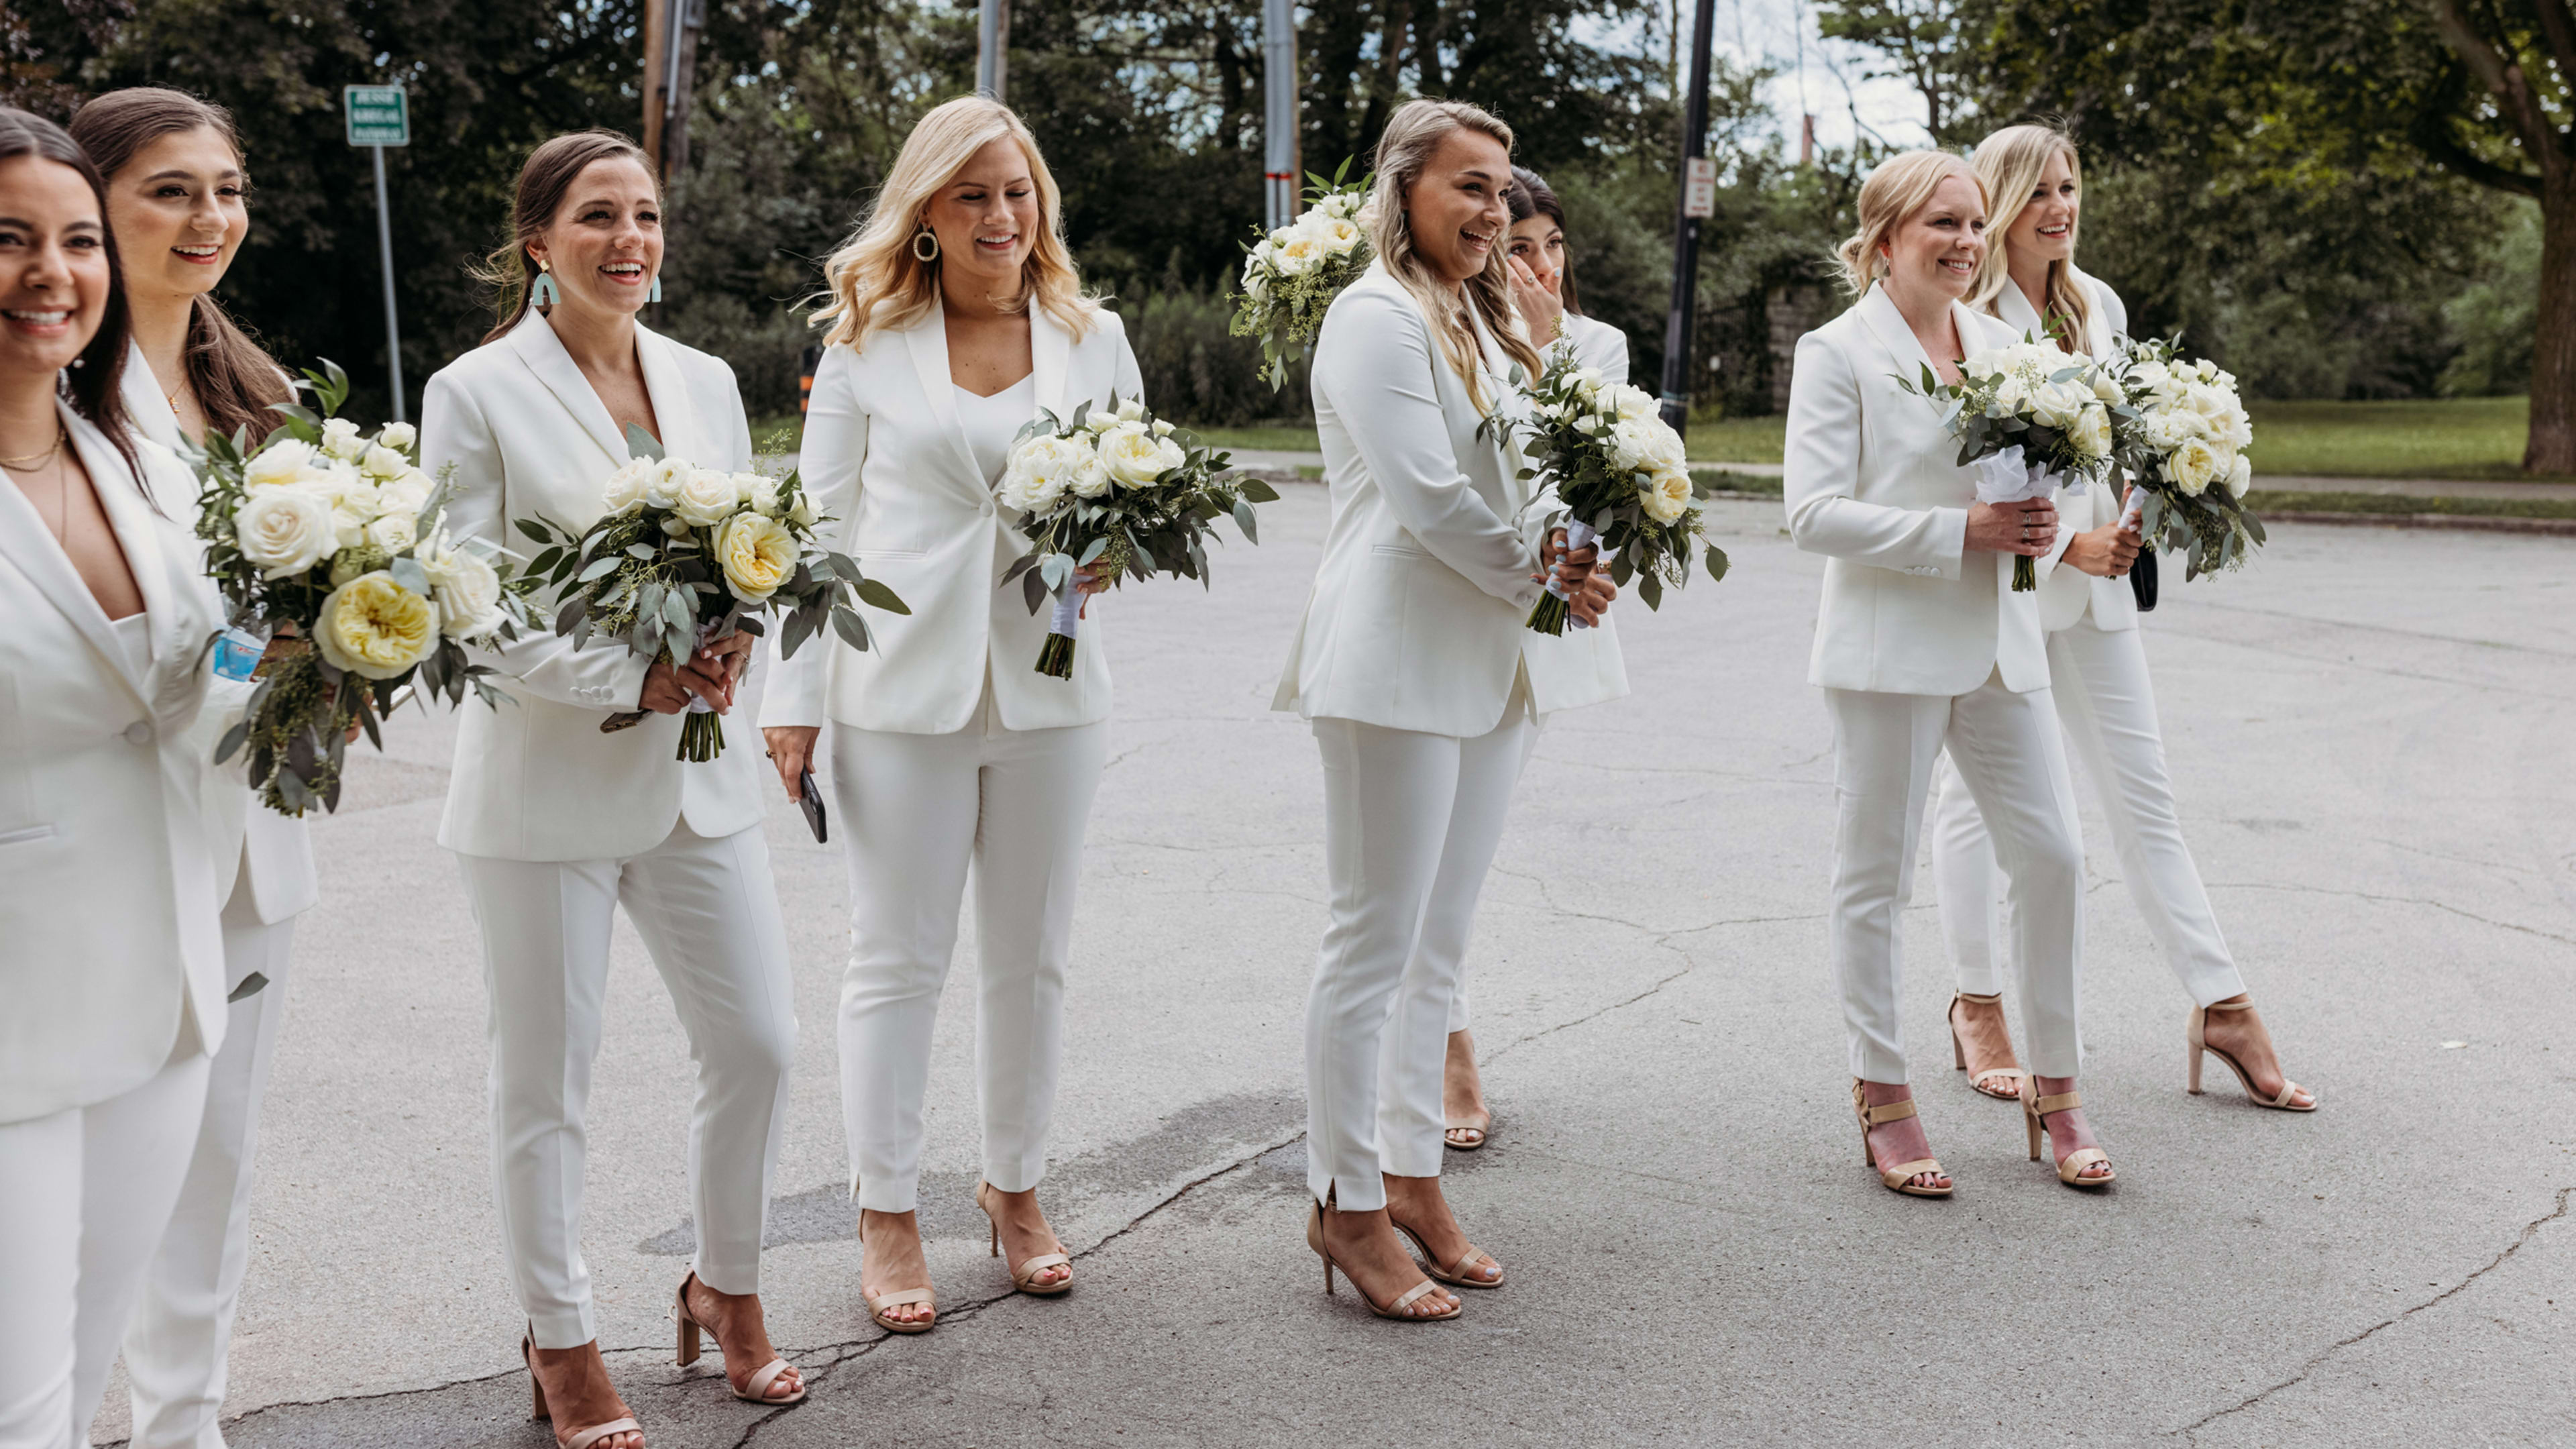 This startup began designing wedding tuxes for women—and its revenues sextupled